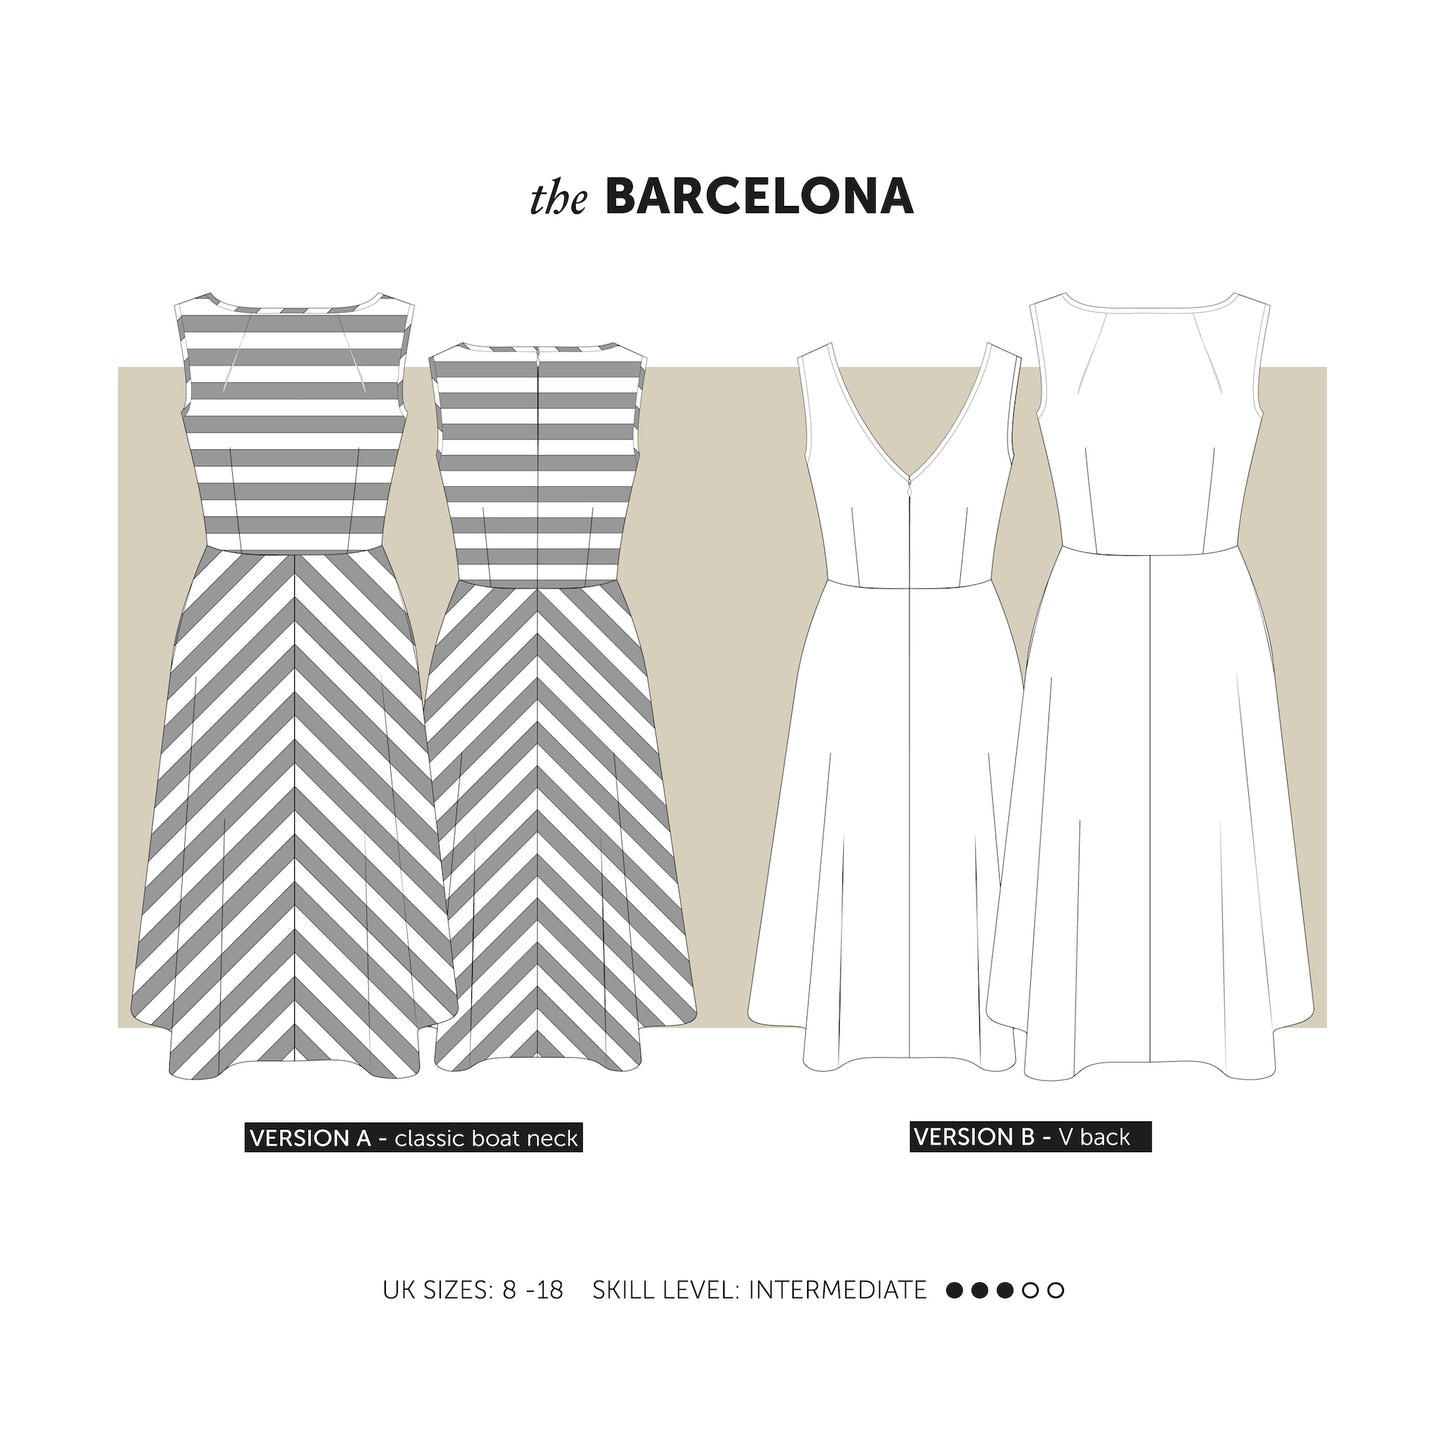 The Barcelona sewing pattern is the perfect dress to take you from day to evening with 2 bodice options – a classic boat neck or a sassy V back.  Indie sewing patterns, contemporary and modern sewing patterns made in the UK.